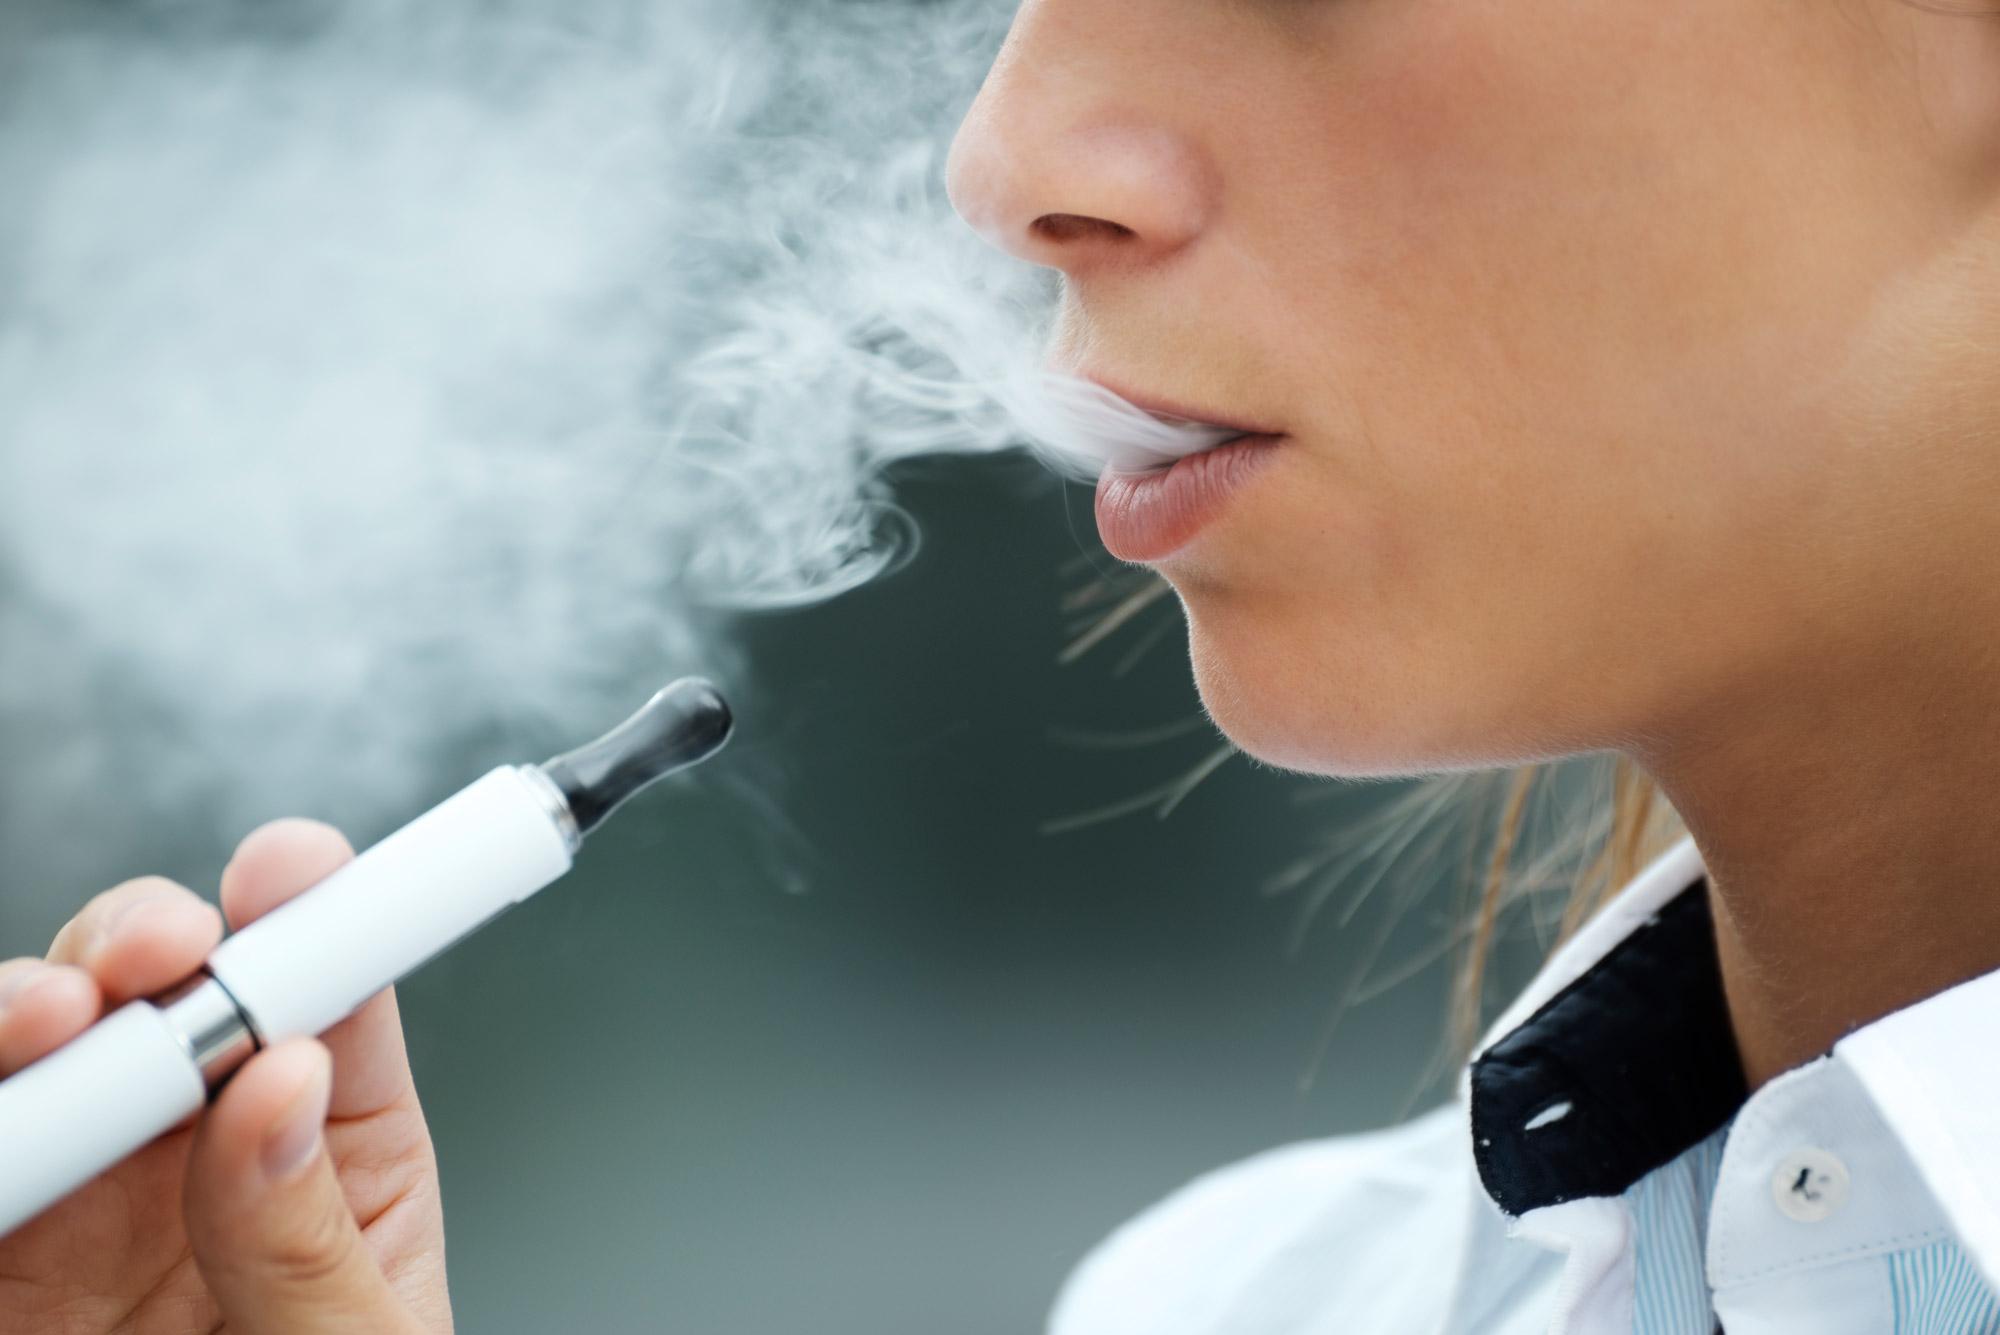 Vaping Linked to Earlier Onset of Asthma